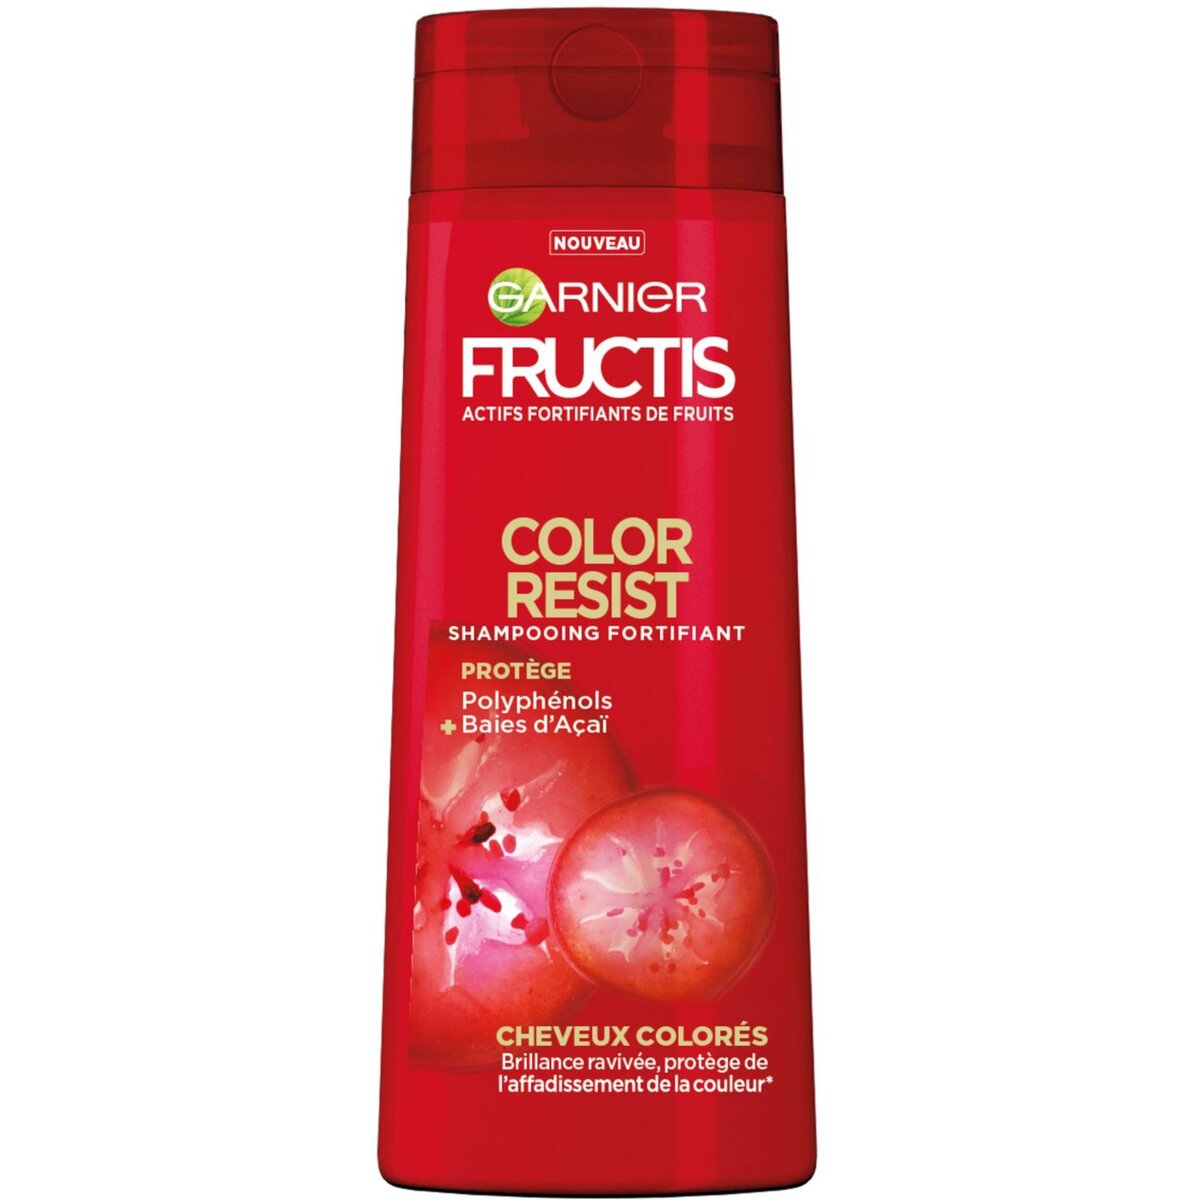 FRUCTIS Fructis shampooing color resist 250ml